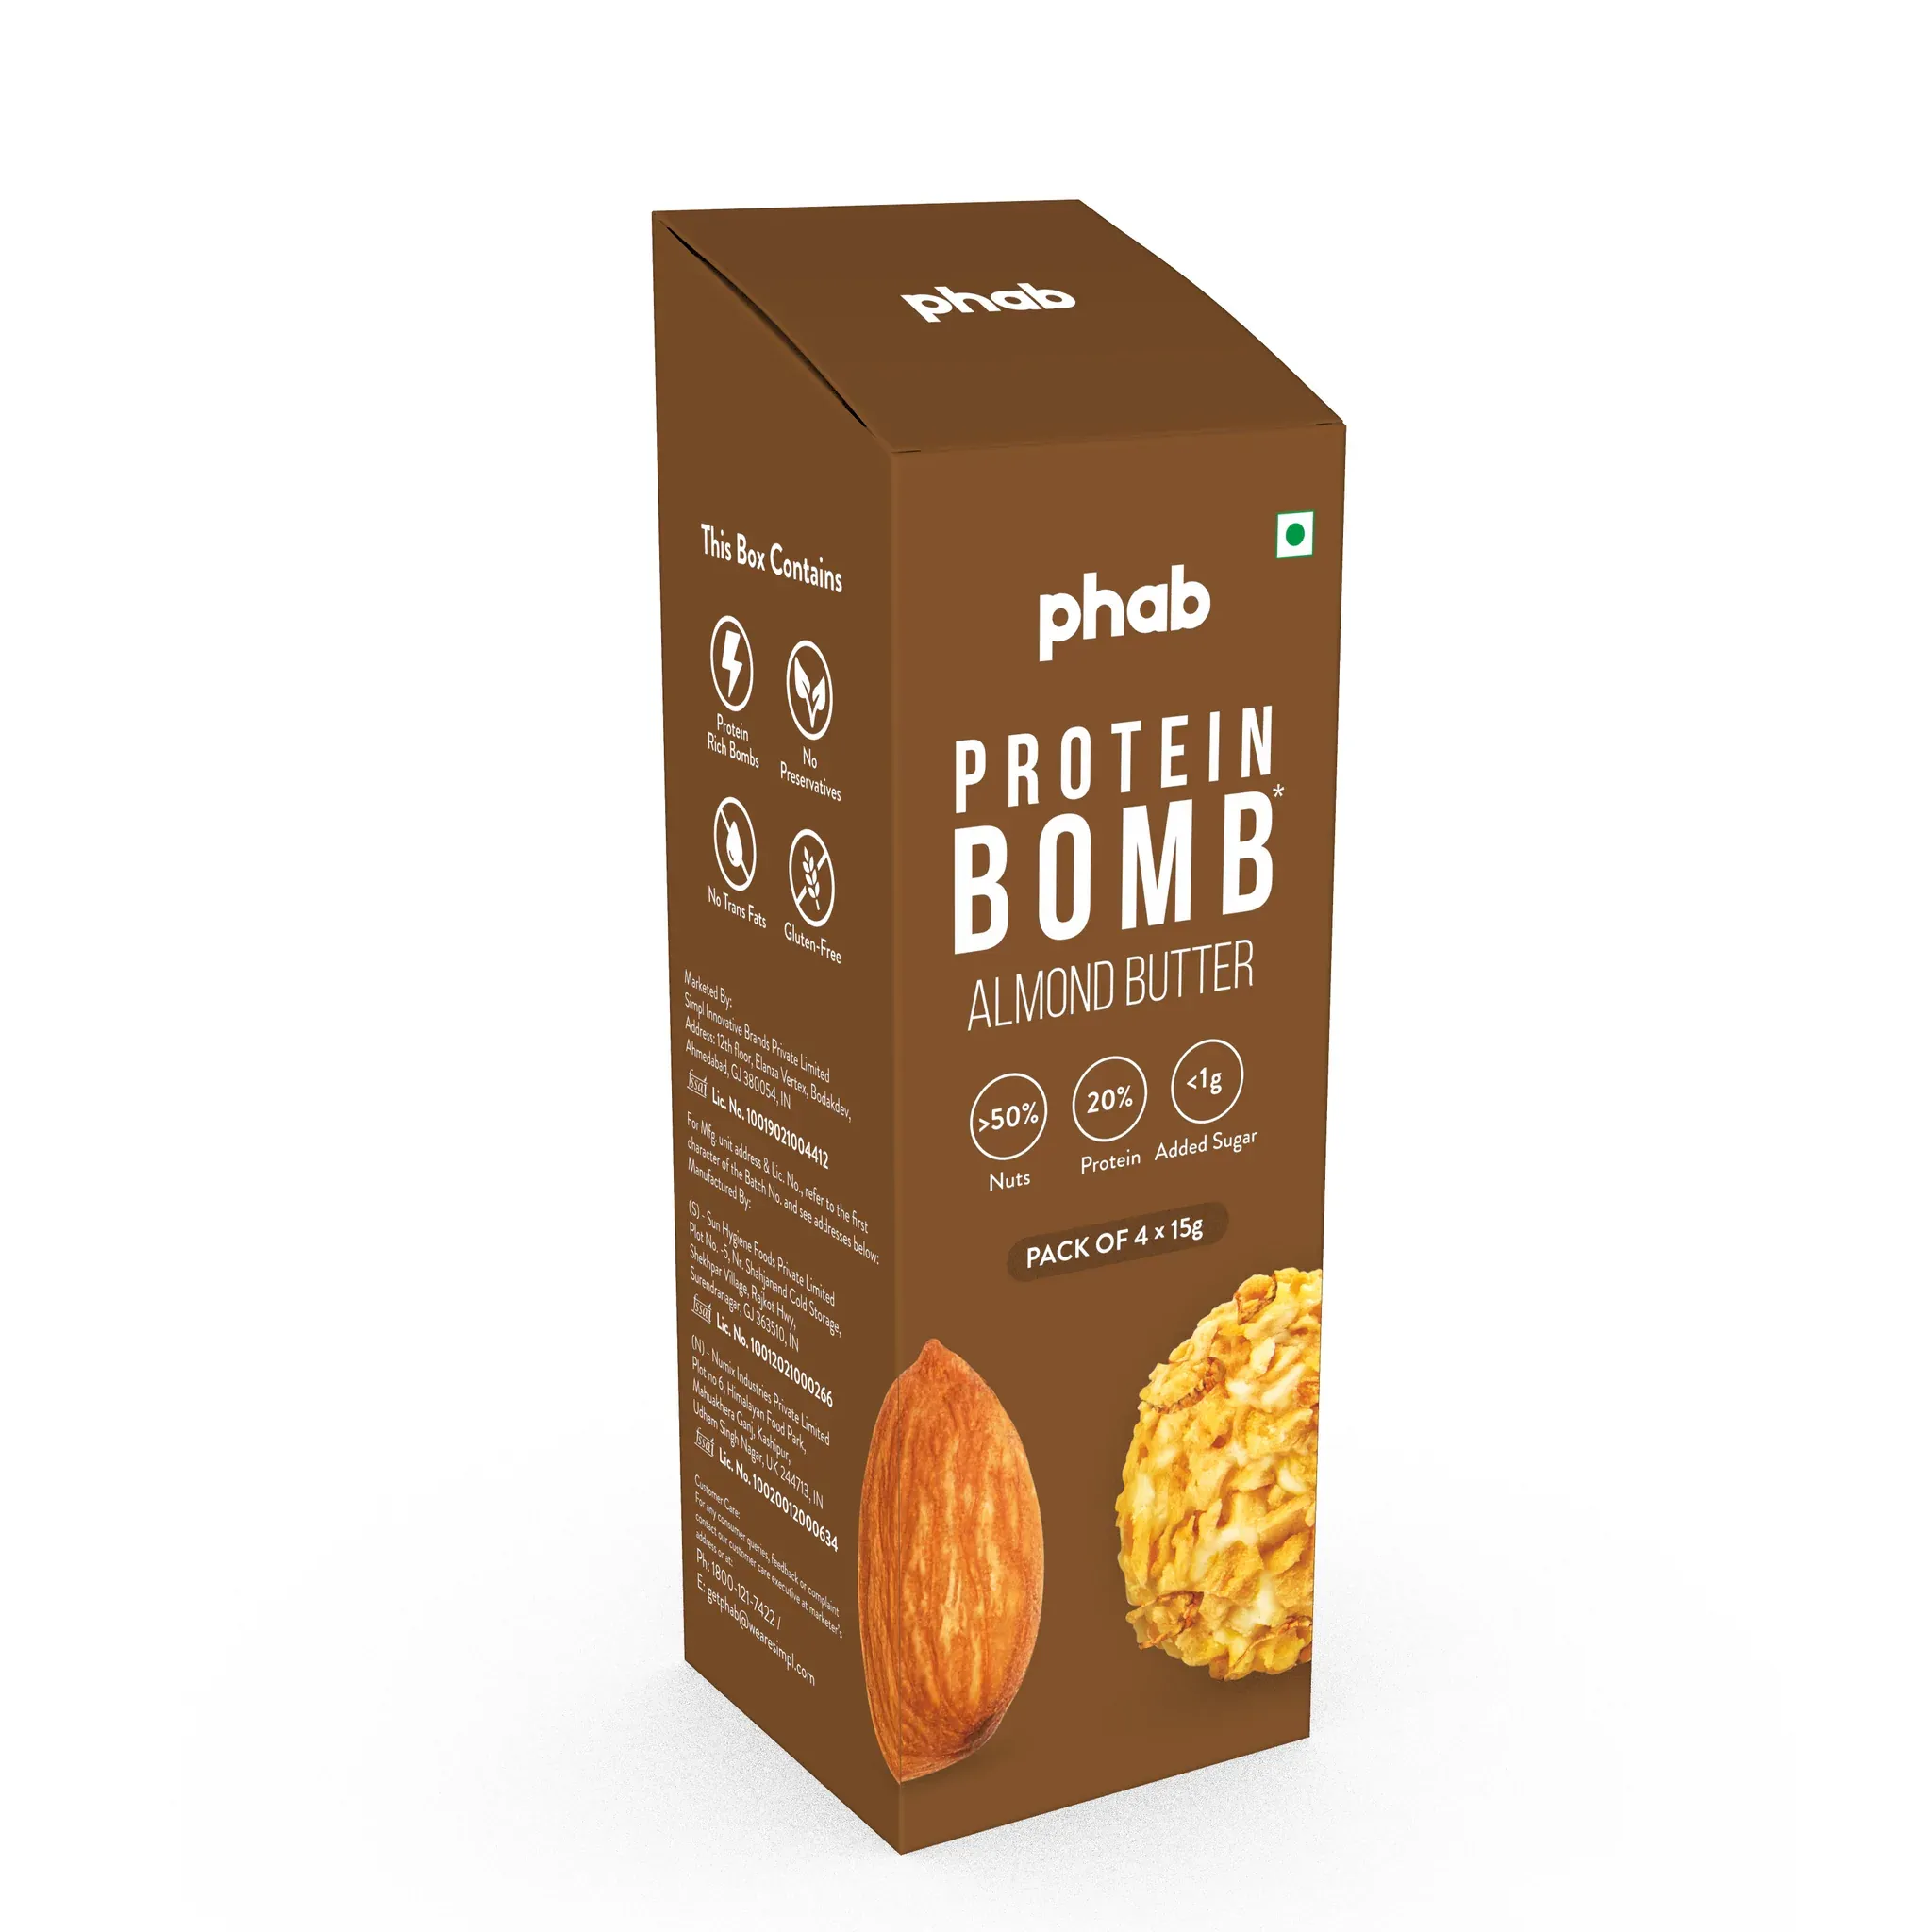 phab Protein Bomb Almond Butter Image